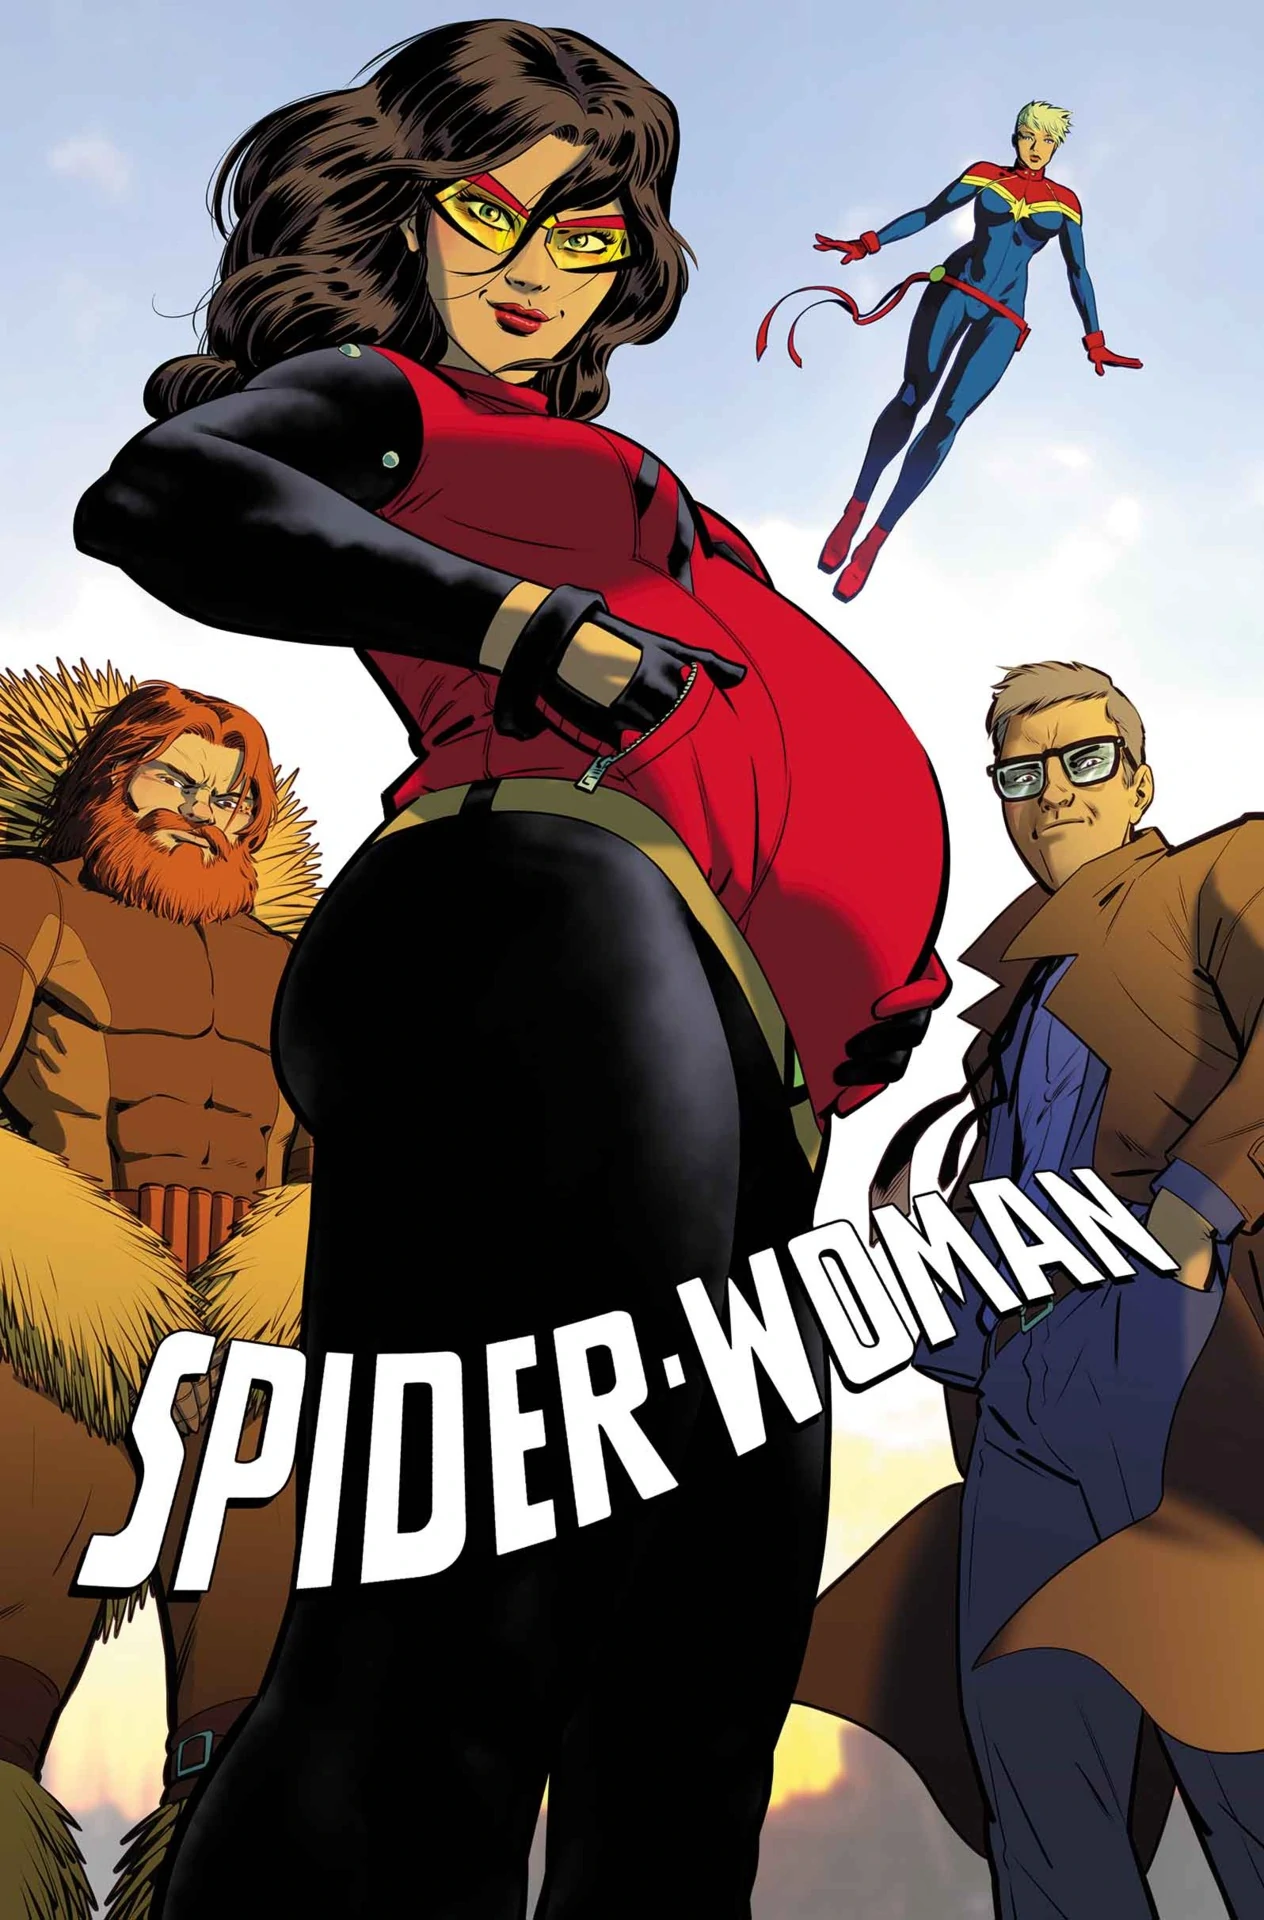 Spider-Woman, Porcupine, Ben Urich, and Carol Danvers on Javier Rodriguez's cover to Spider-Woman Vol. 6 #2 (2015), Marvel Comics via digital issue